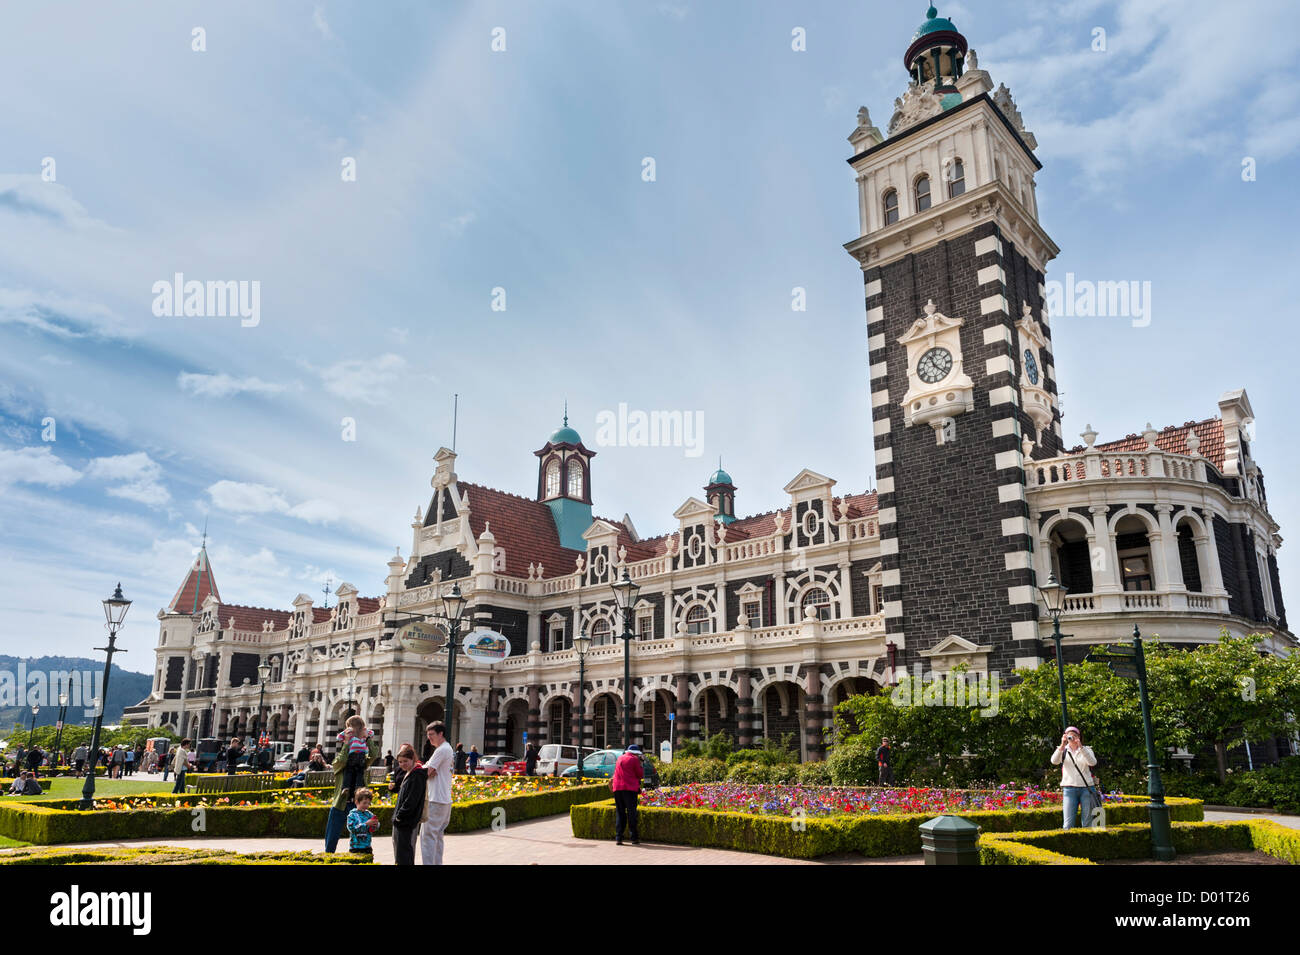 Dunedin Railway Station. Designed by George A. Troup, opened in 1906. New Zealand, South Island Stock Photo